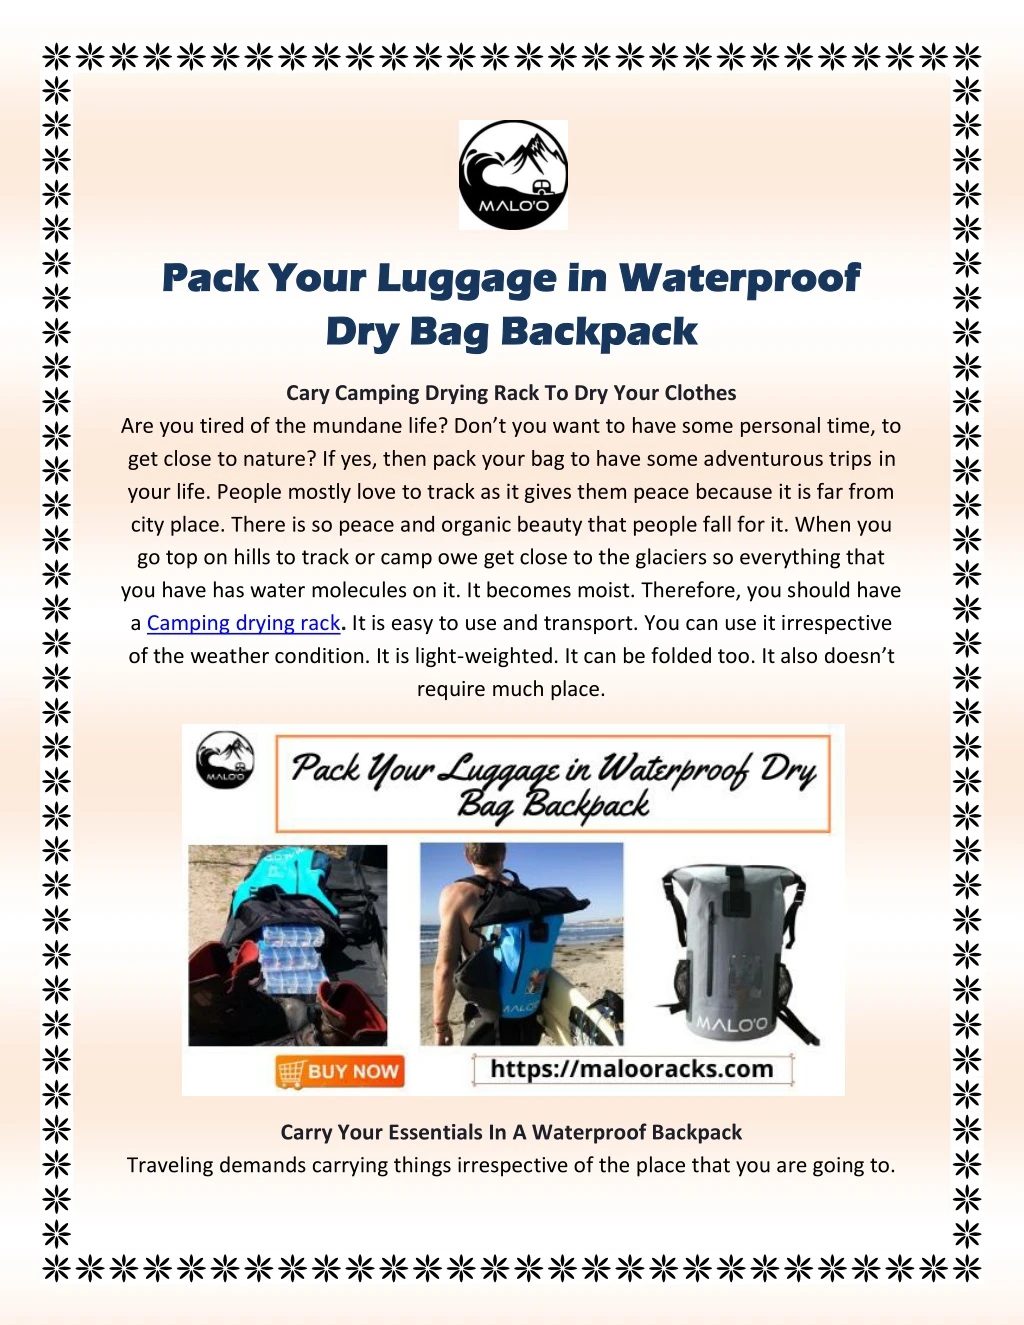 pack your luggage in waterproof pack your luggage